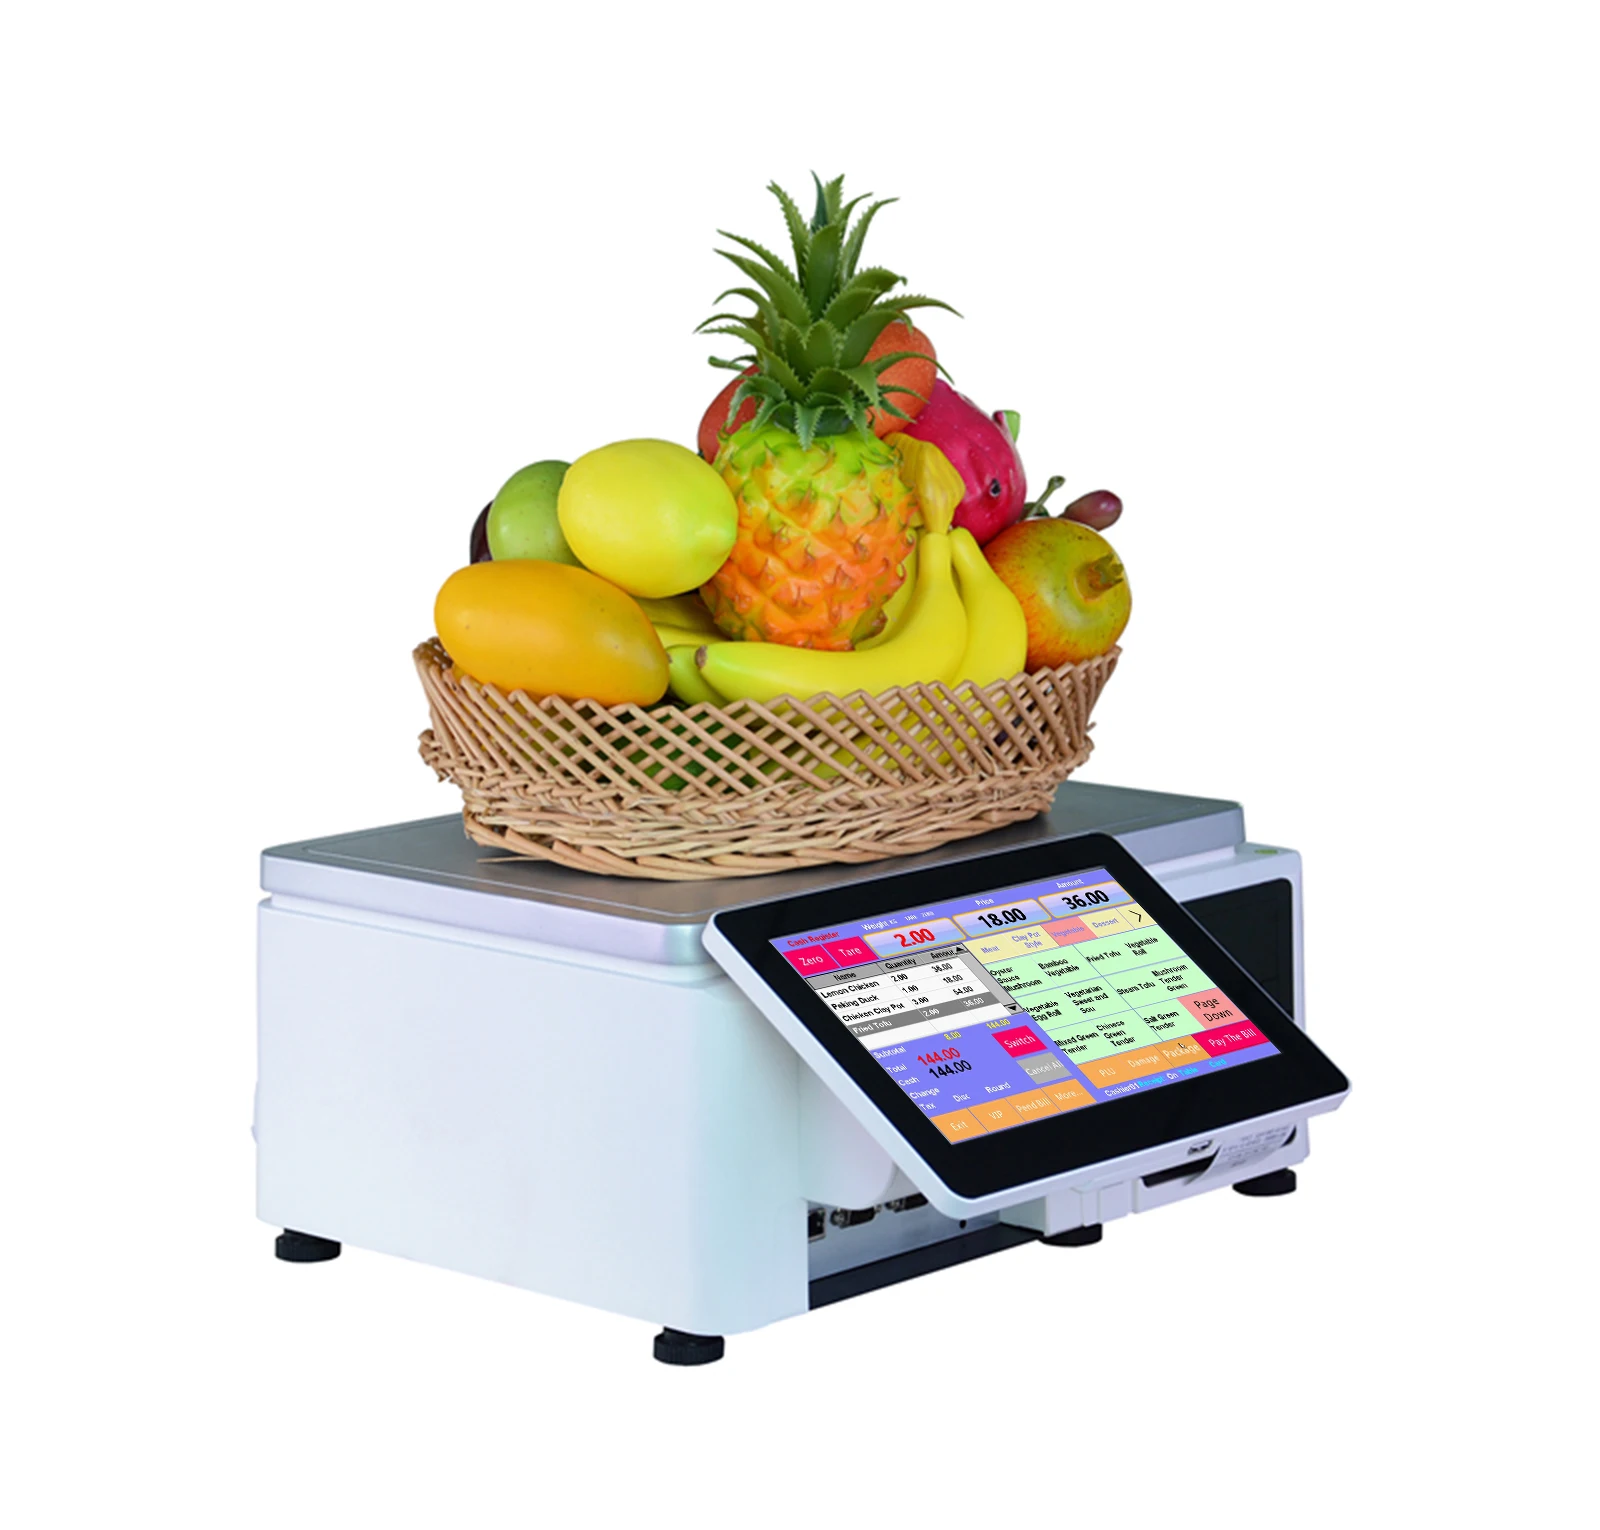 A new generation of All in one 10 inch capacitive touch screen cash register scale T10 with 58mm thermal printer